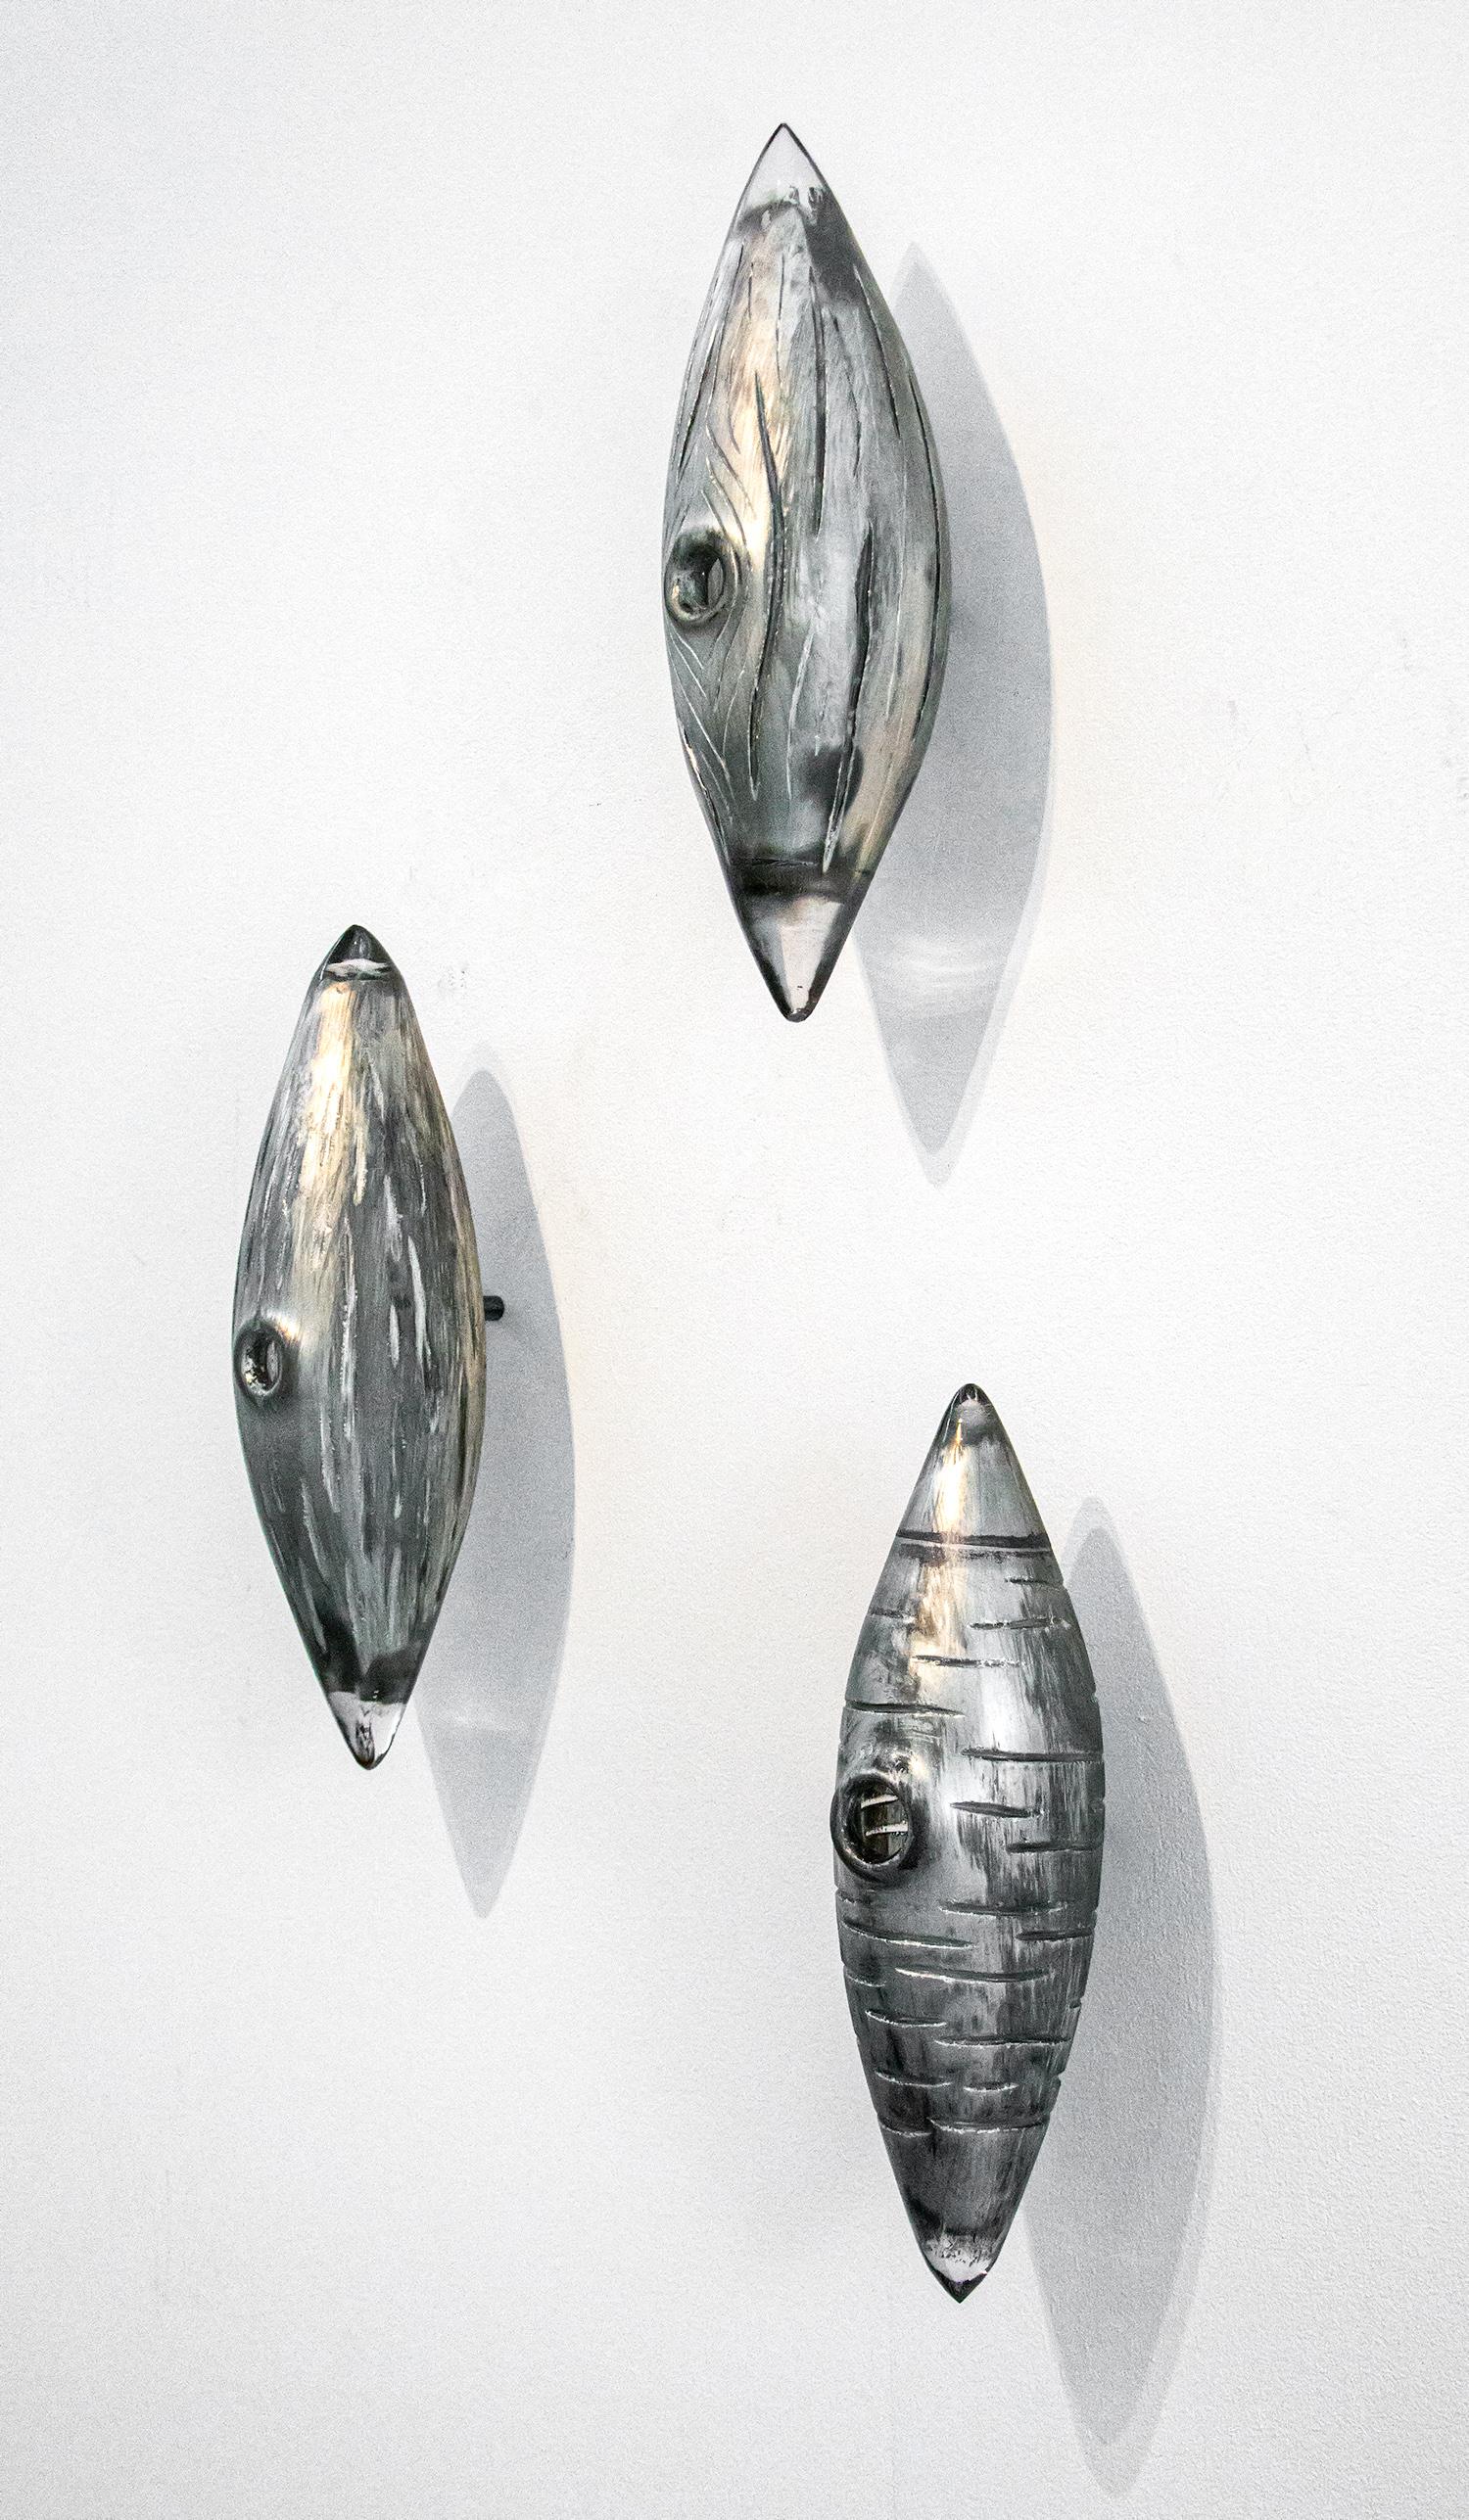 Three glass cocoon shapes in clear and silver with a woodgrain texture are curated vertically in this unique wall sculpture by Julia Reimer. Inspired by nature, the elements resemble cocoons or because they are each pierced with a round hole, bird's